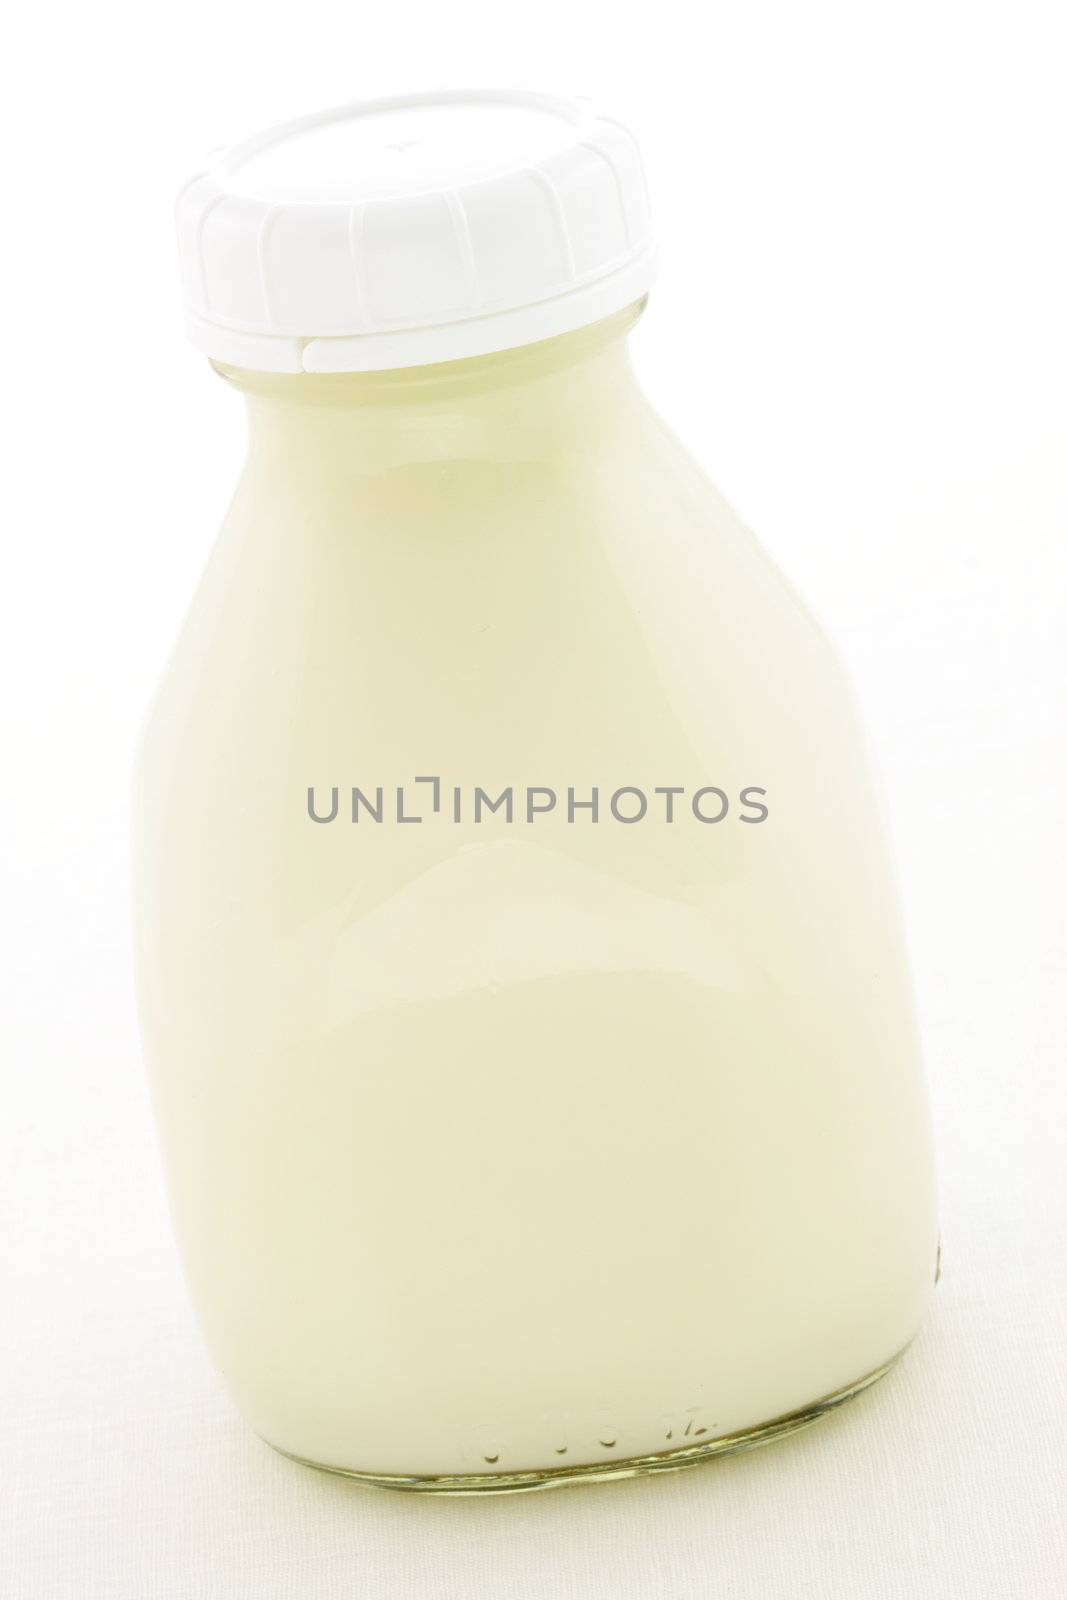 Delicious, nutritious and fresh Pint Glass Milk Bottle.